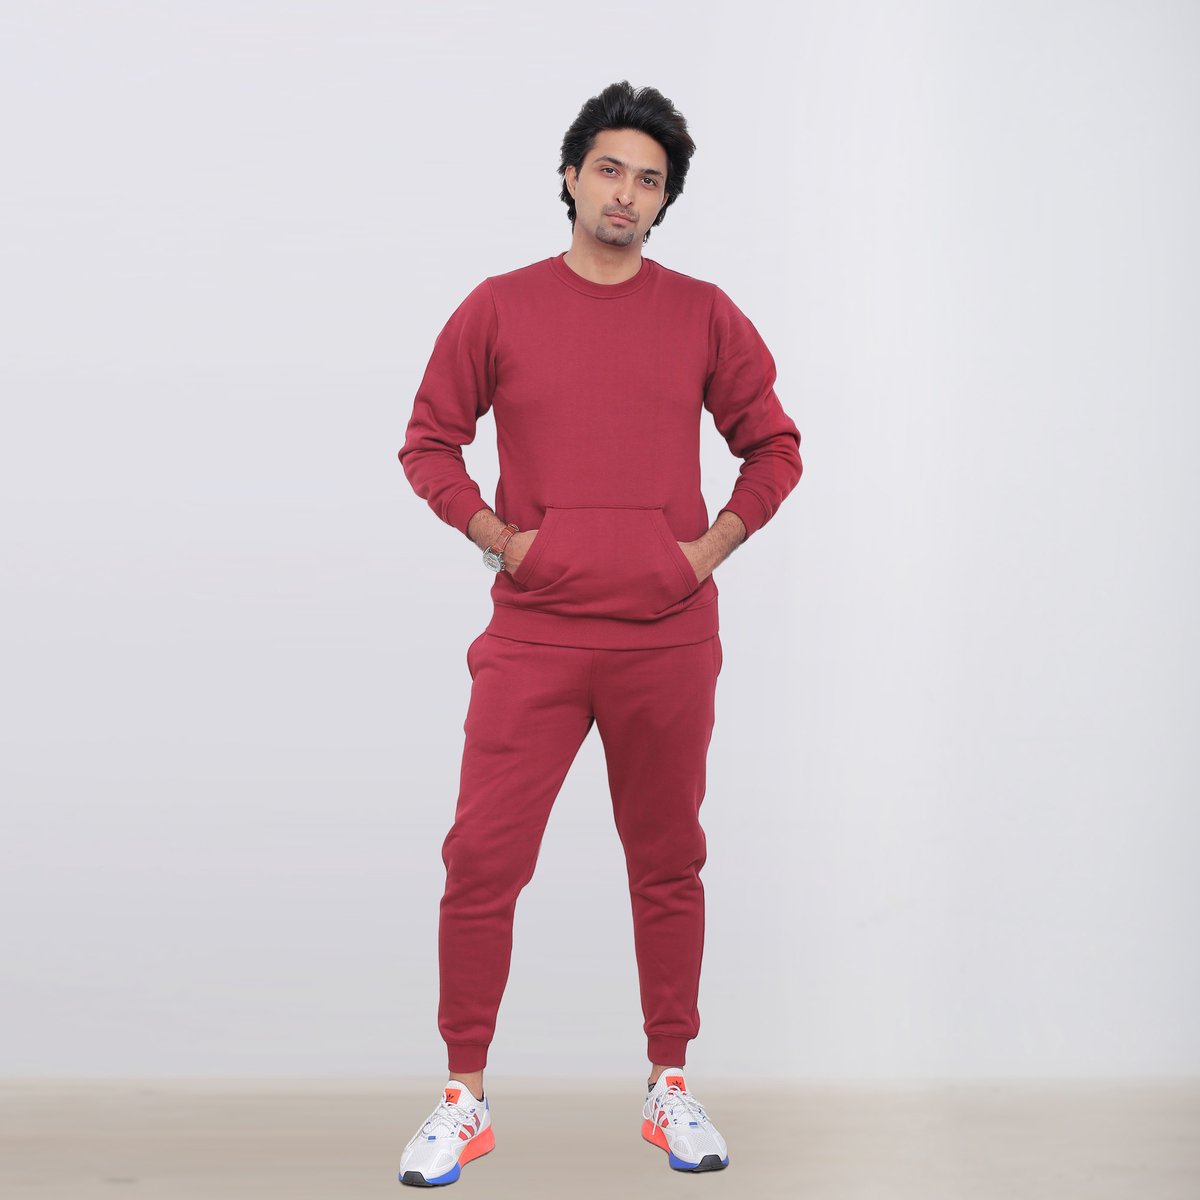 ICONICX Mens Plain Tracksuit Fleece Pullover Sweatshirt with Trousers Cotton Jogging Suit Exercise, Fitness, Boxing MMA, Maroon